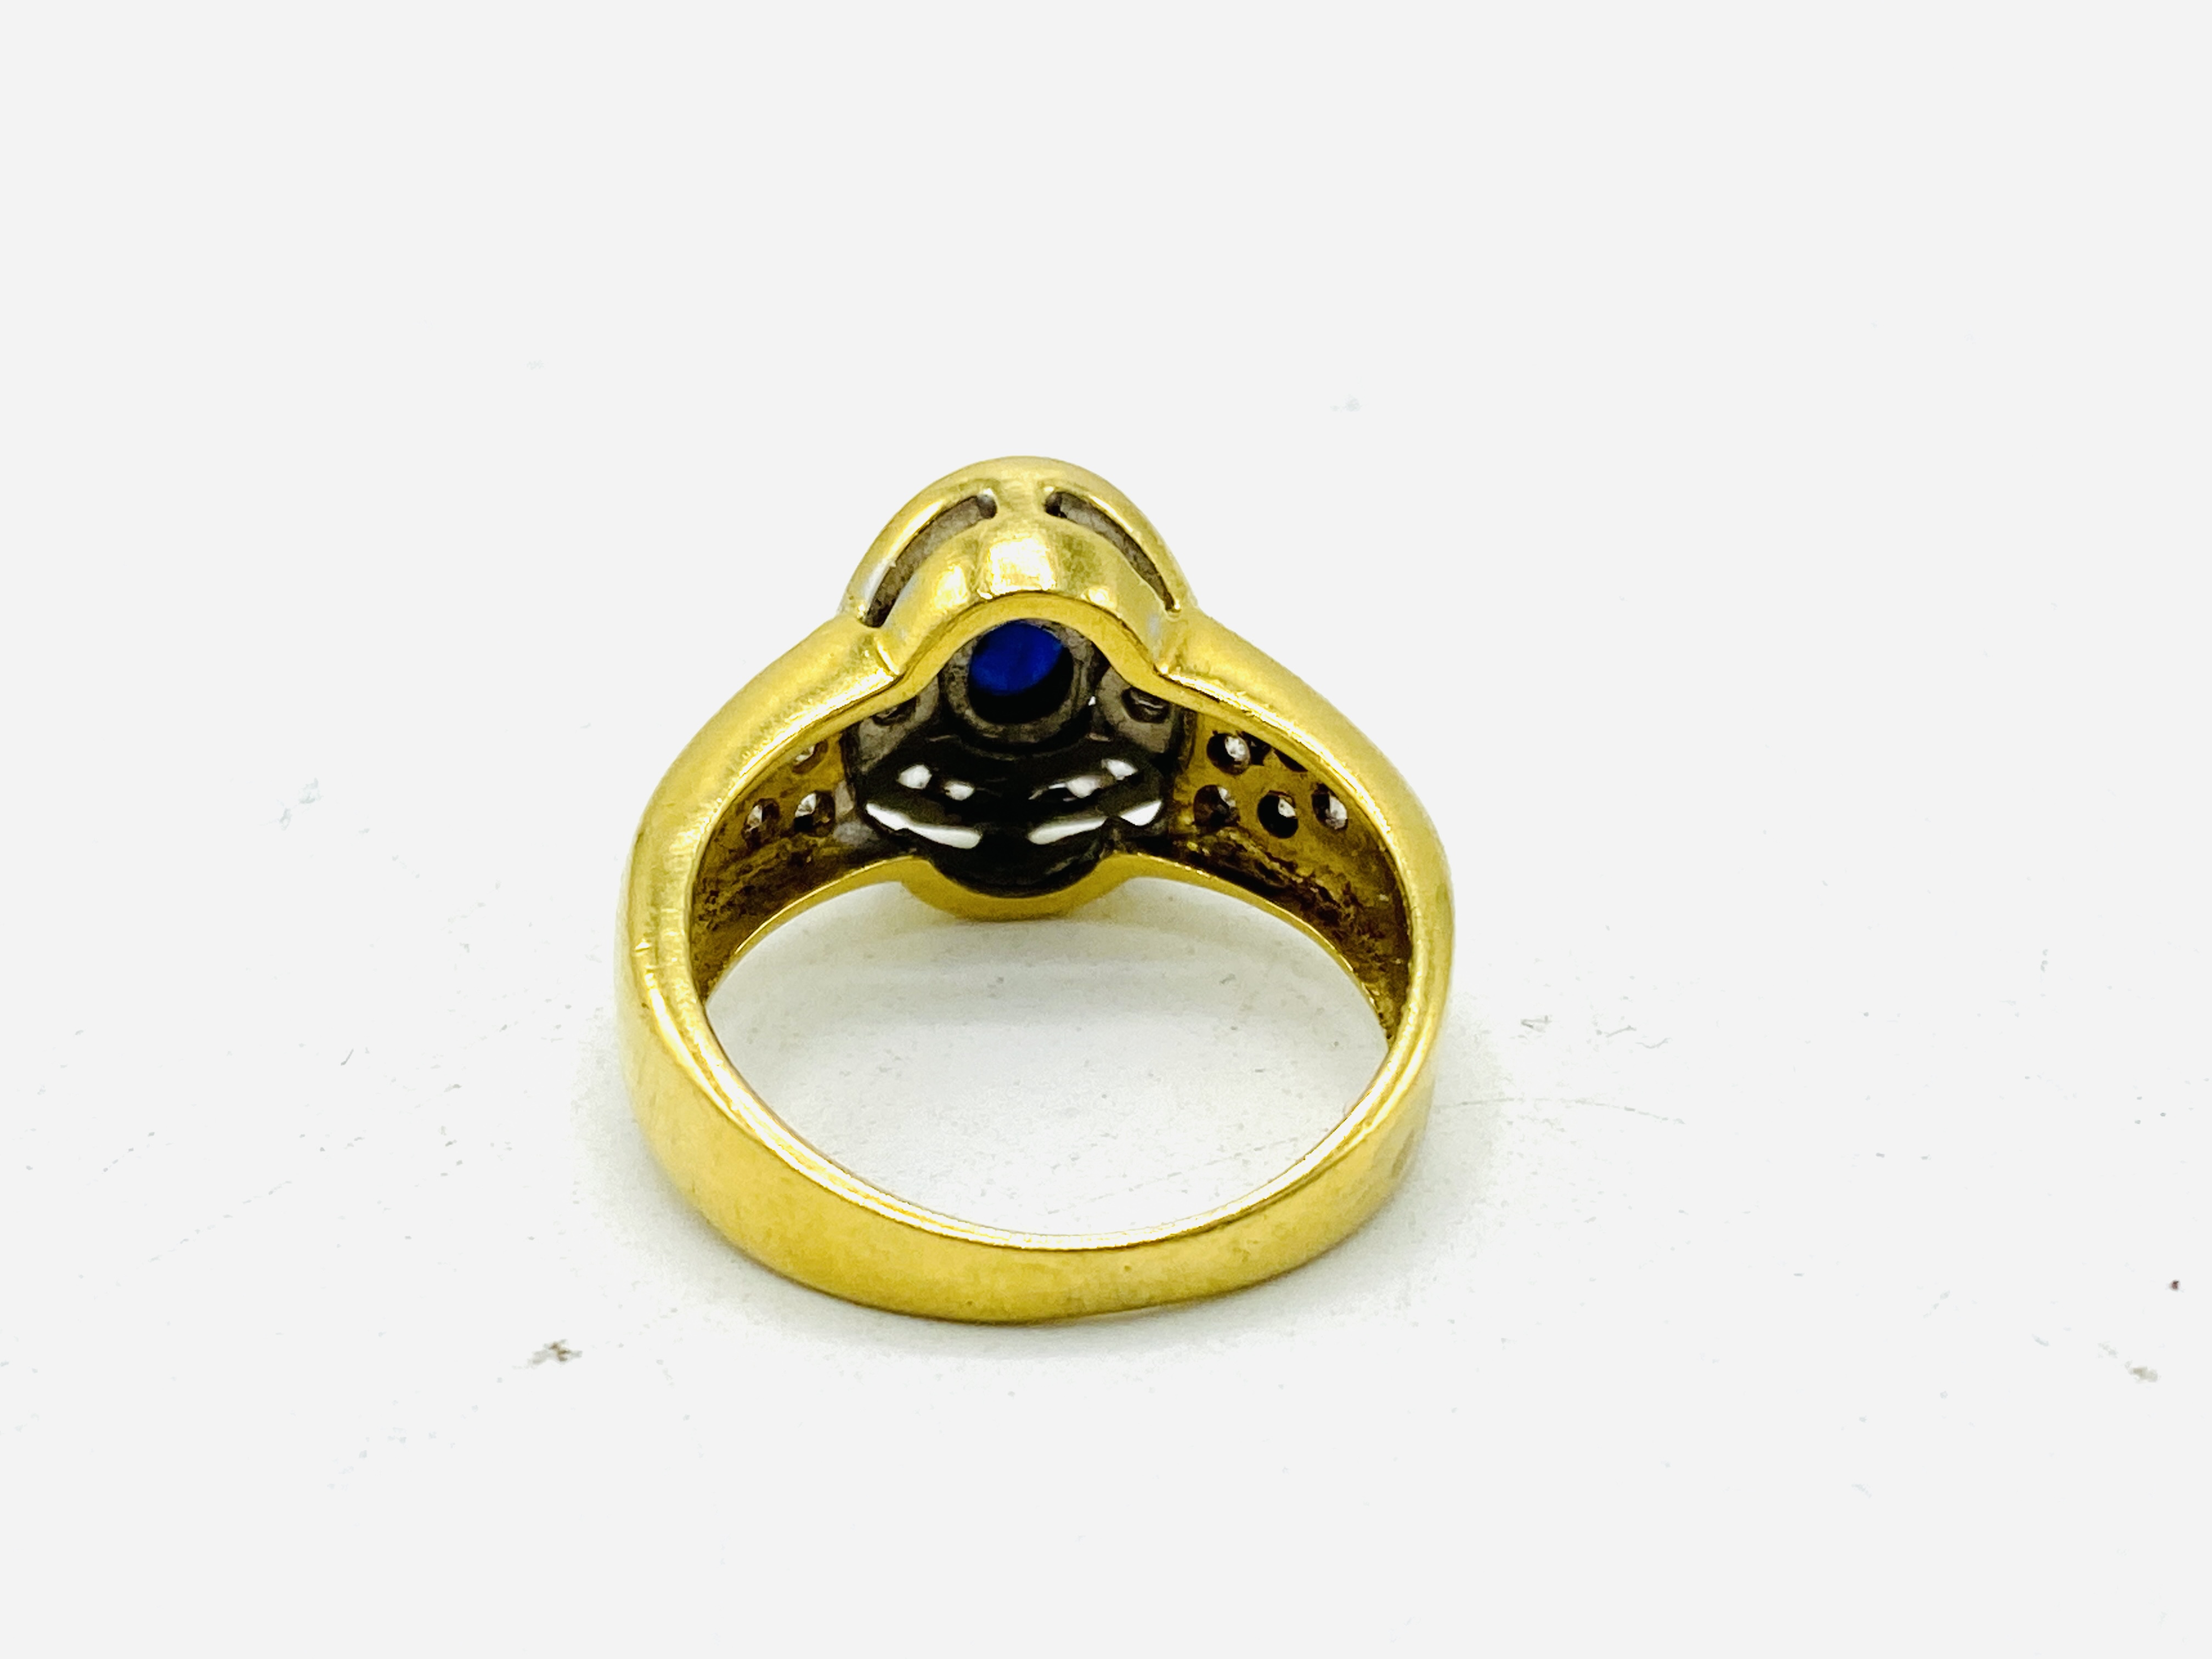 18ct gold, diamond and sapphire ring - Image 6 of 7